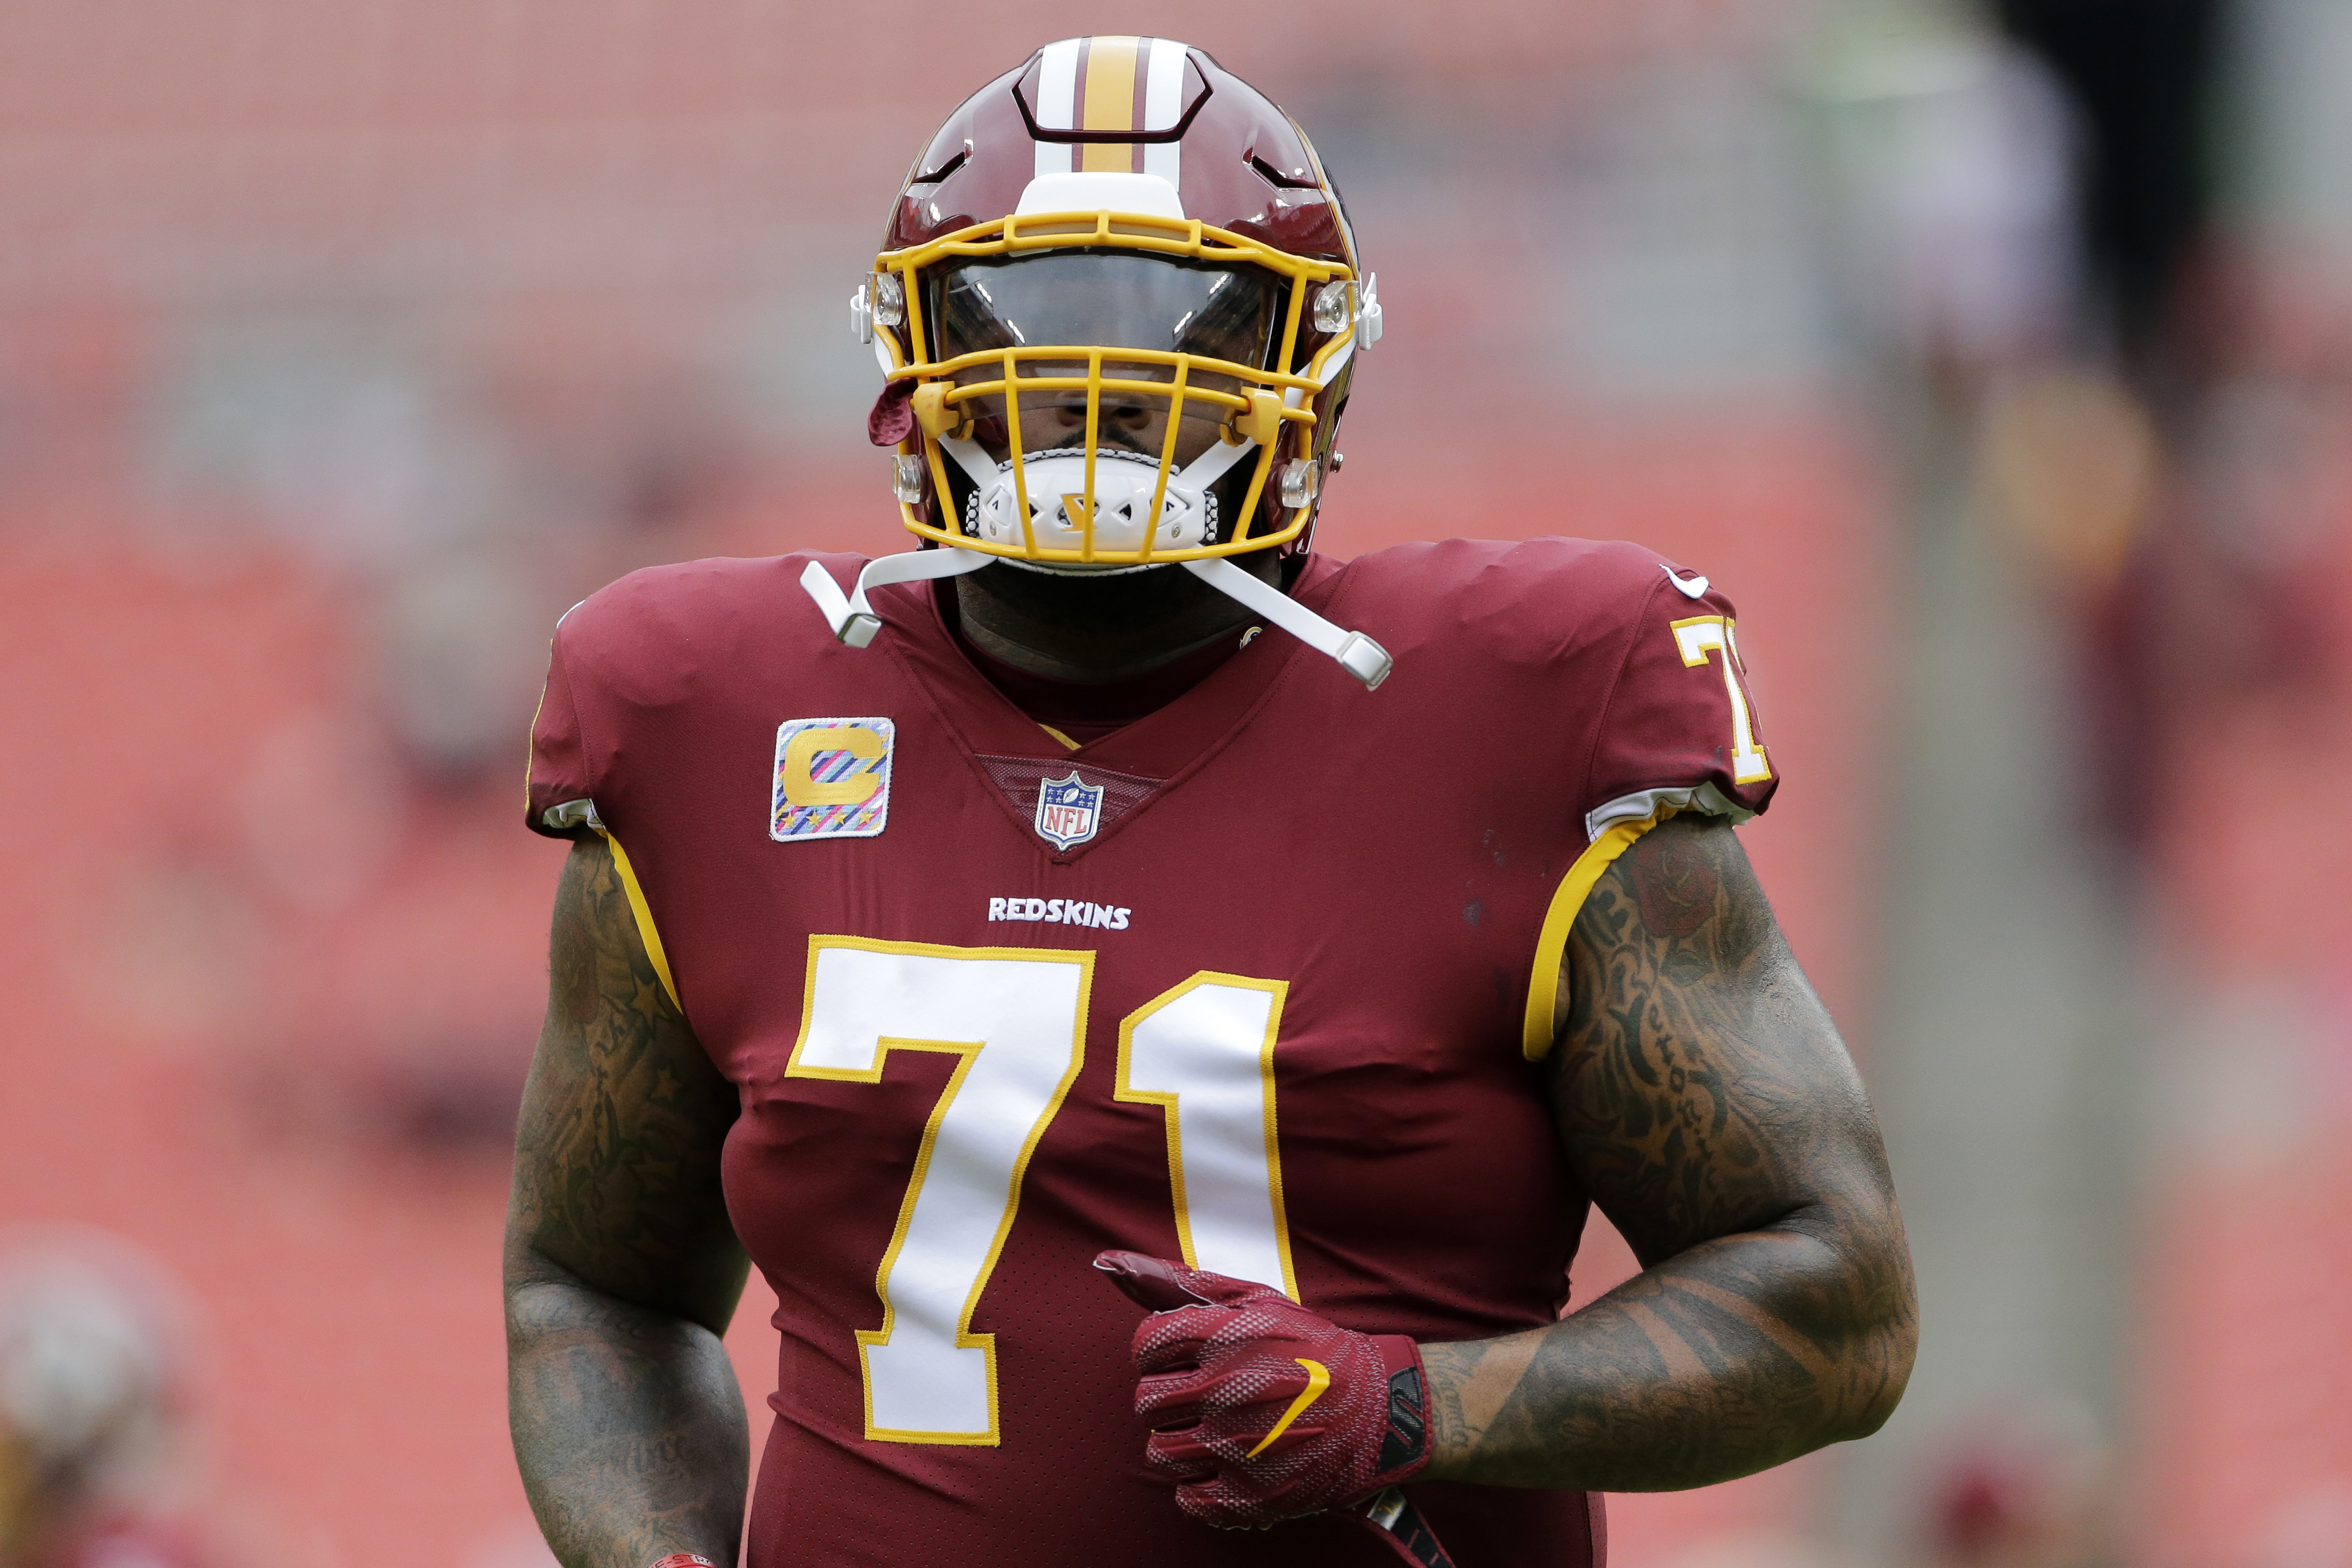 Trent Williams, others take pride in swapping jerseys - Washington ...